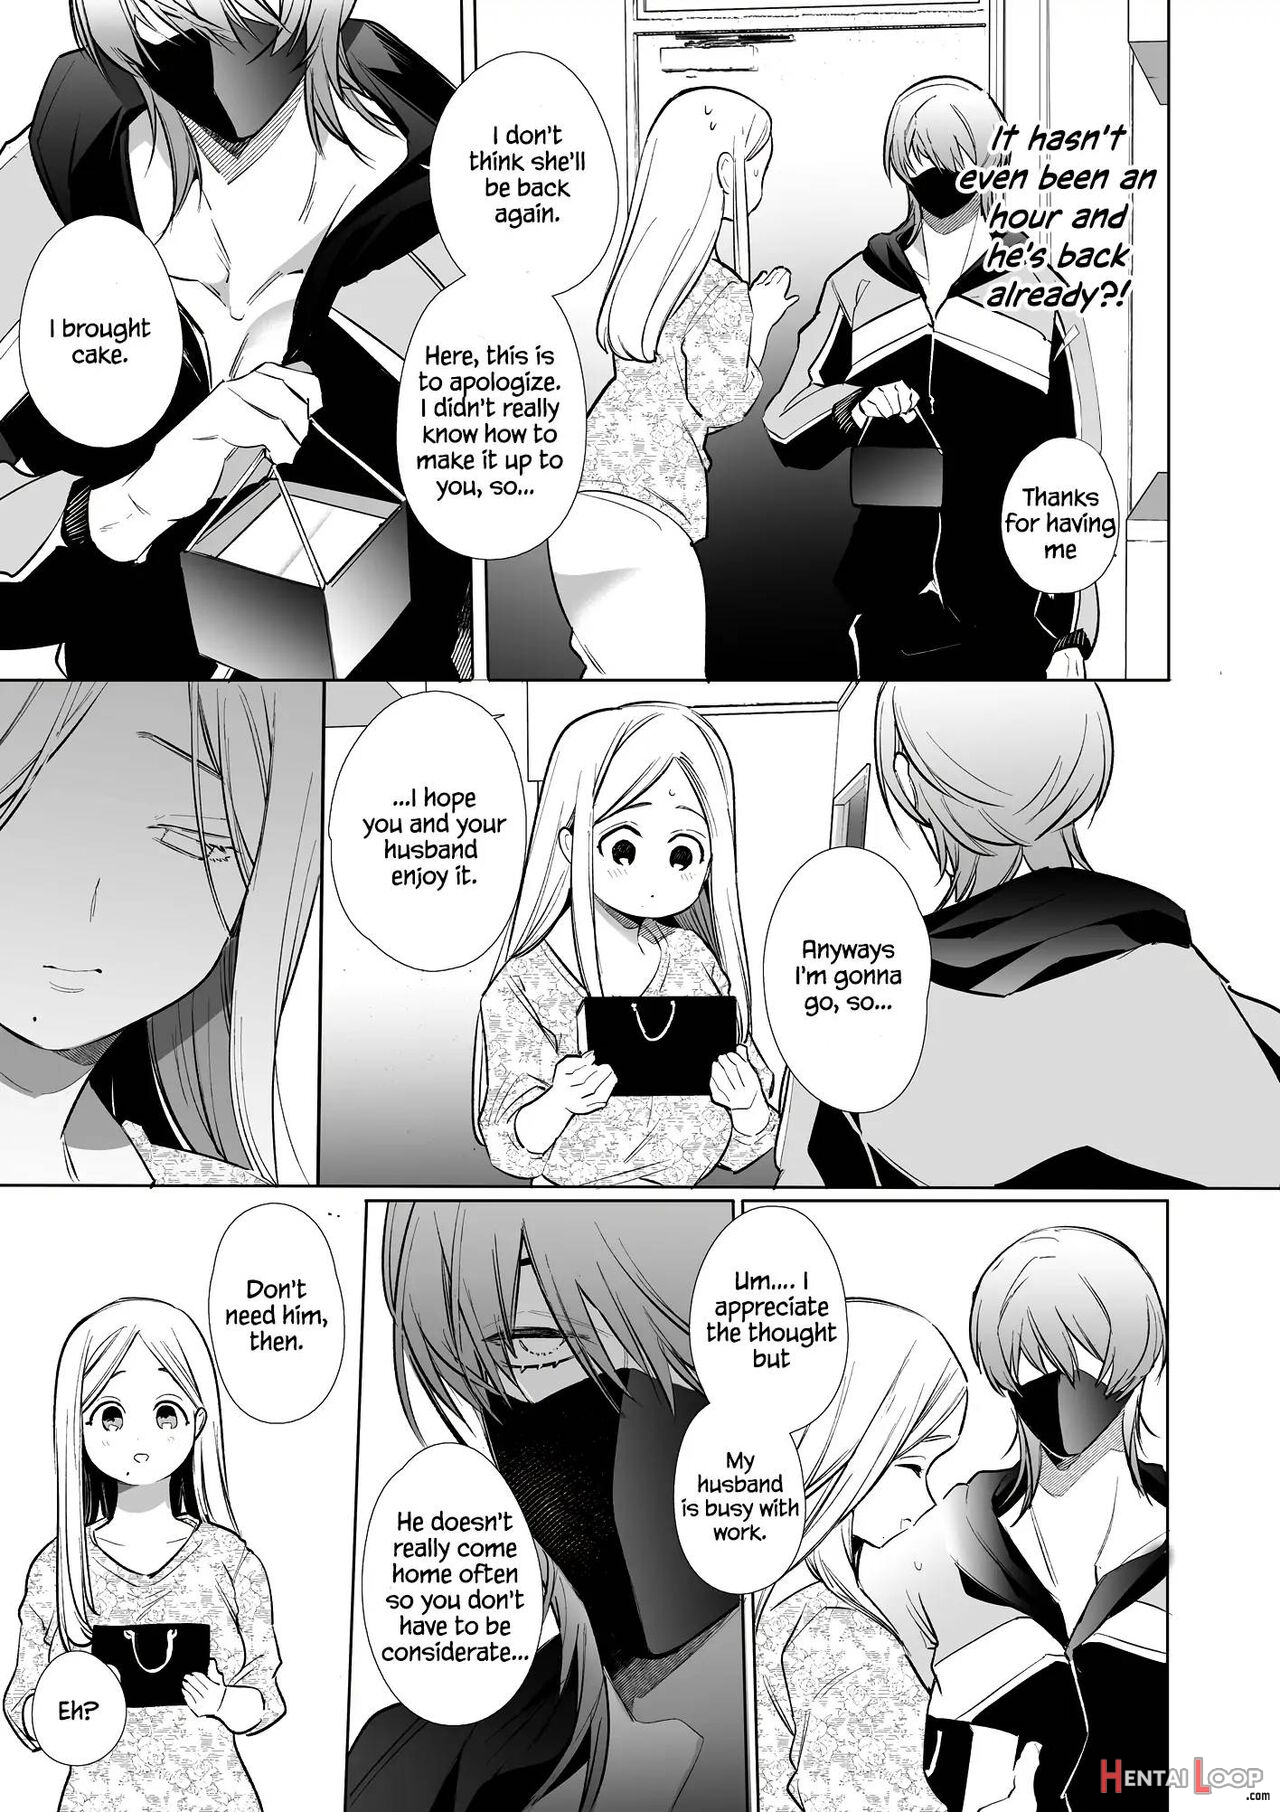 Kana-san Ntr ~ Degradation Of A Housewife By A Guy In An Alter Account ~ page 16